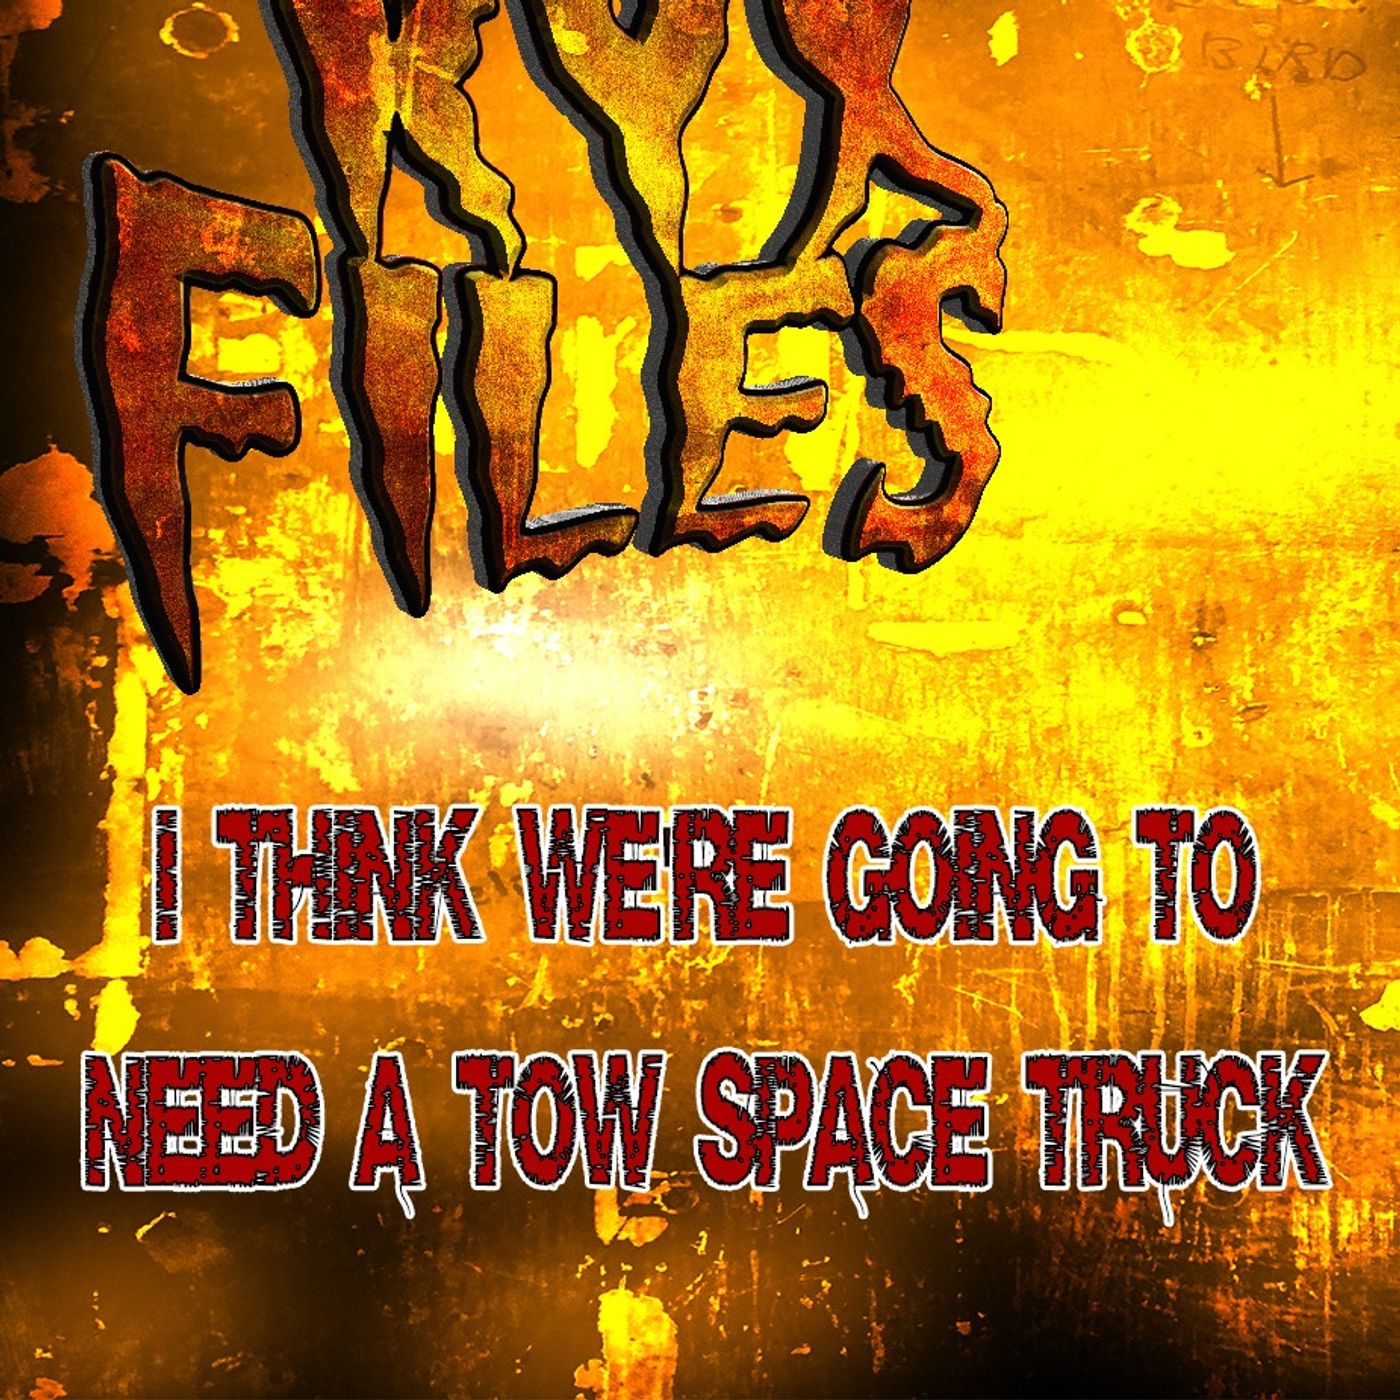 s367: Maybe the UFO just broke down. We need a space tow truck.